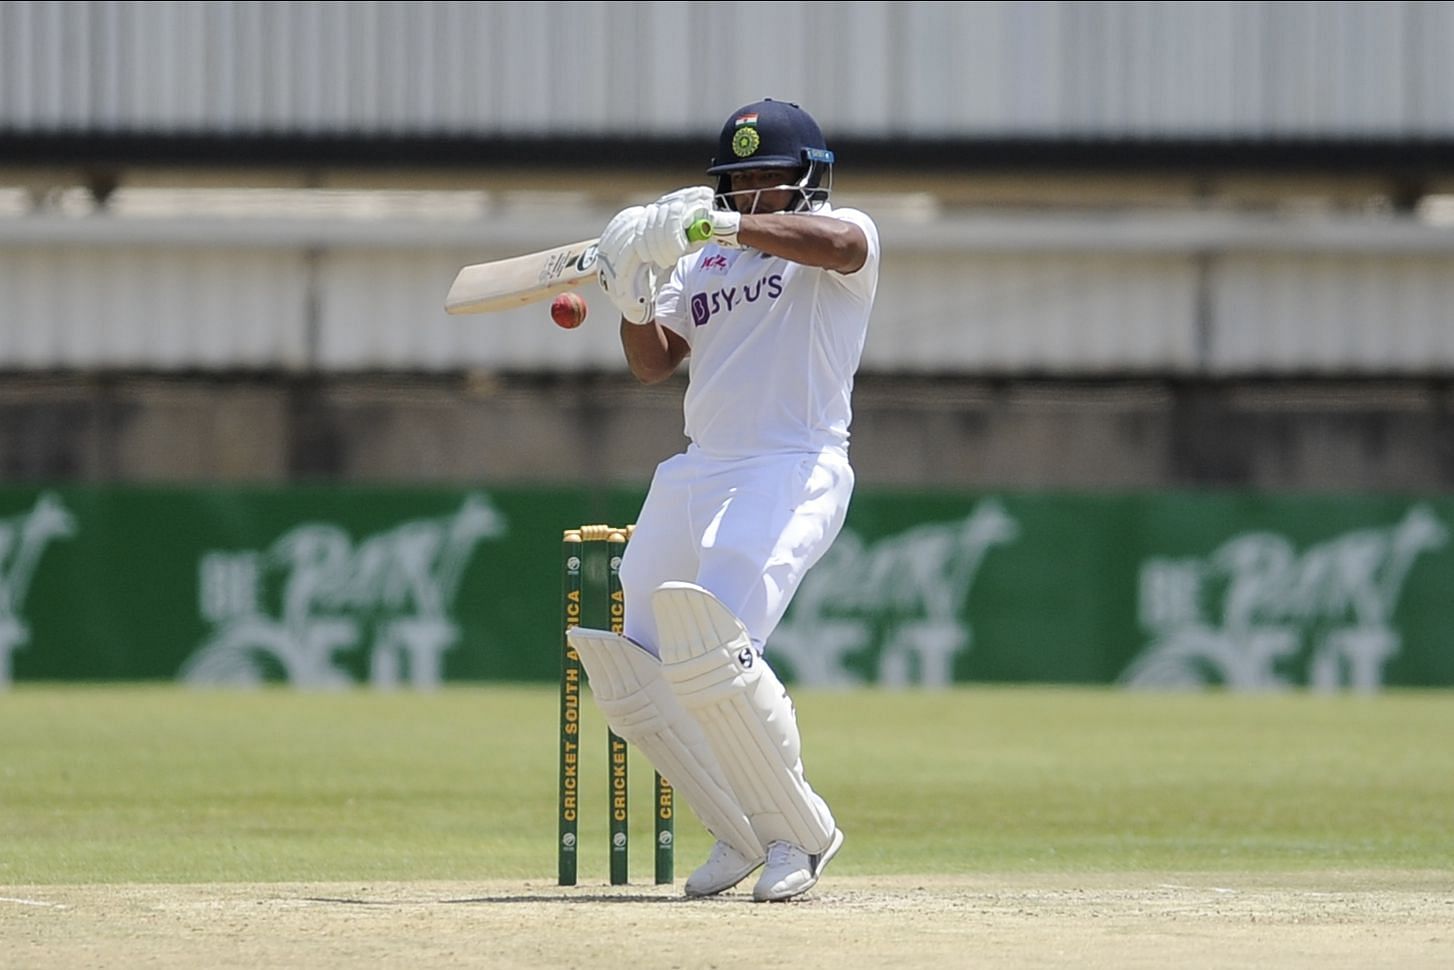 Sarfaraz Khan has amassed 3751 runs at an average of 68.20 in 44 first-class games. [P/C: Getty]